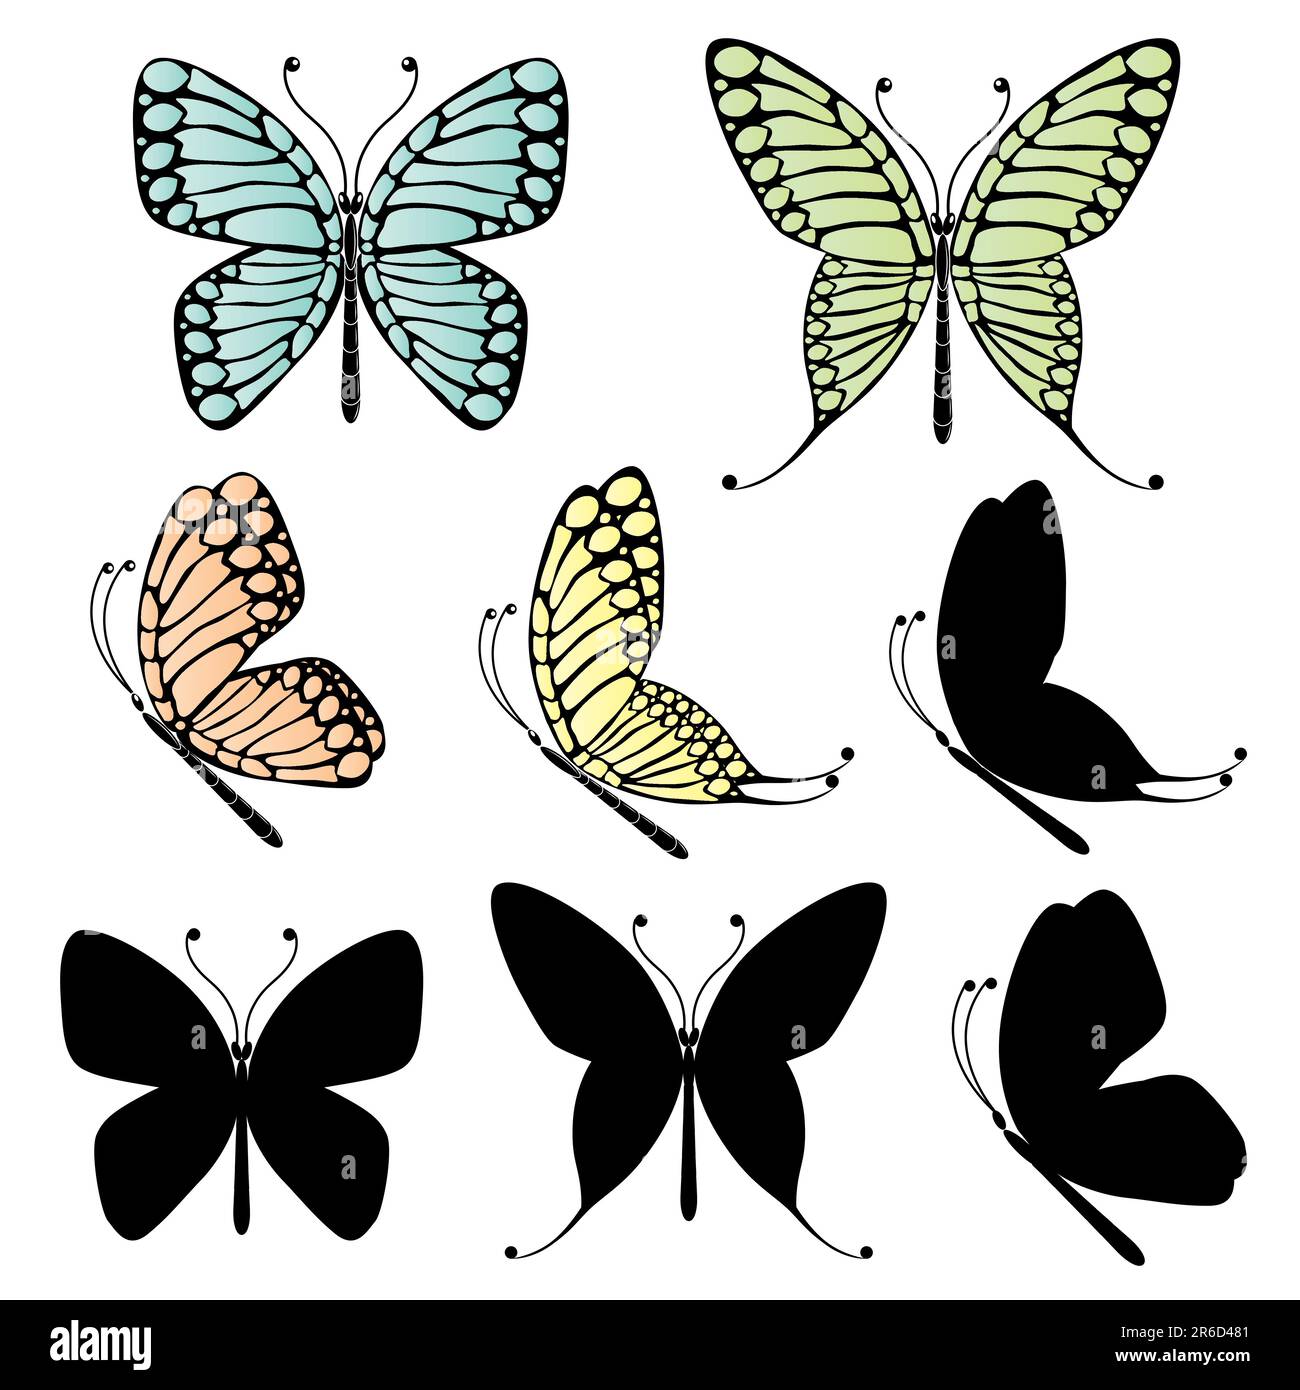 Vector isolated illustration of Butterflies. Stock Vector